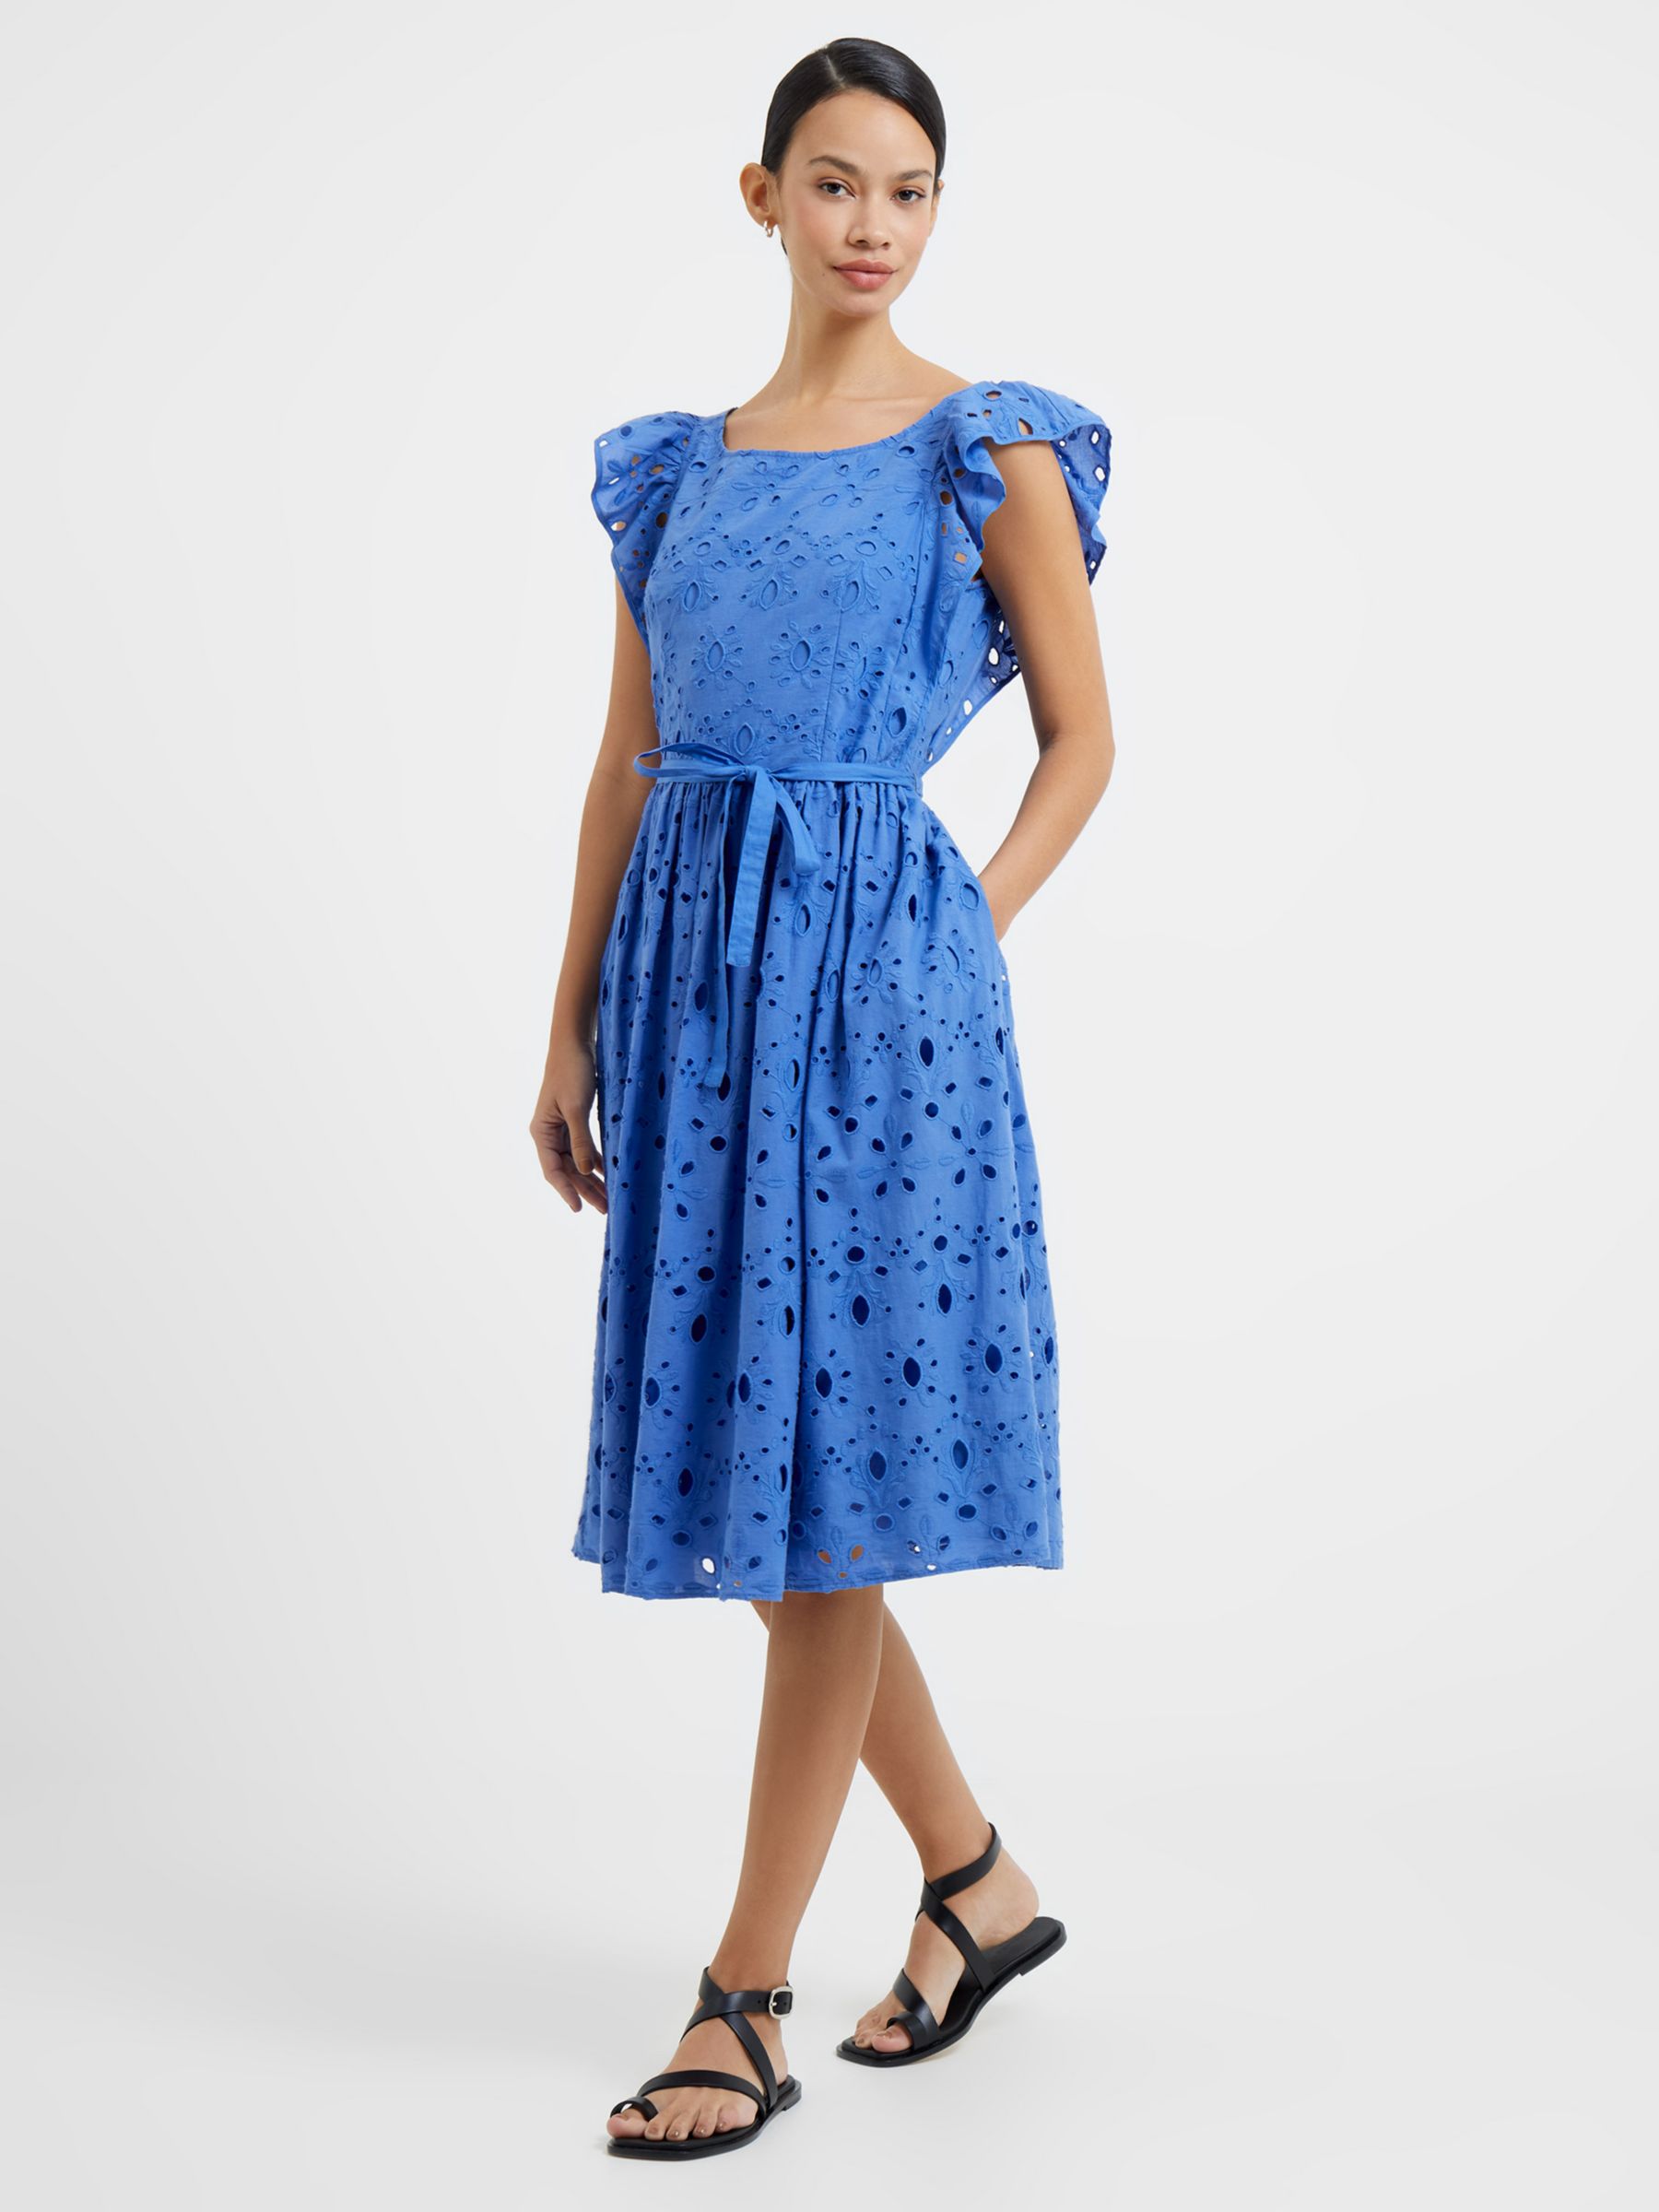 French Connection Cilla Broderie Anglaise Dress, Baja Blue, 12